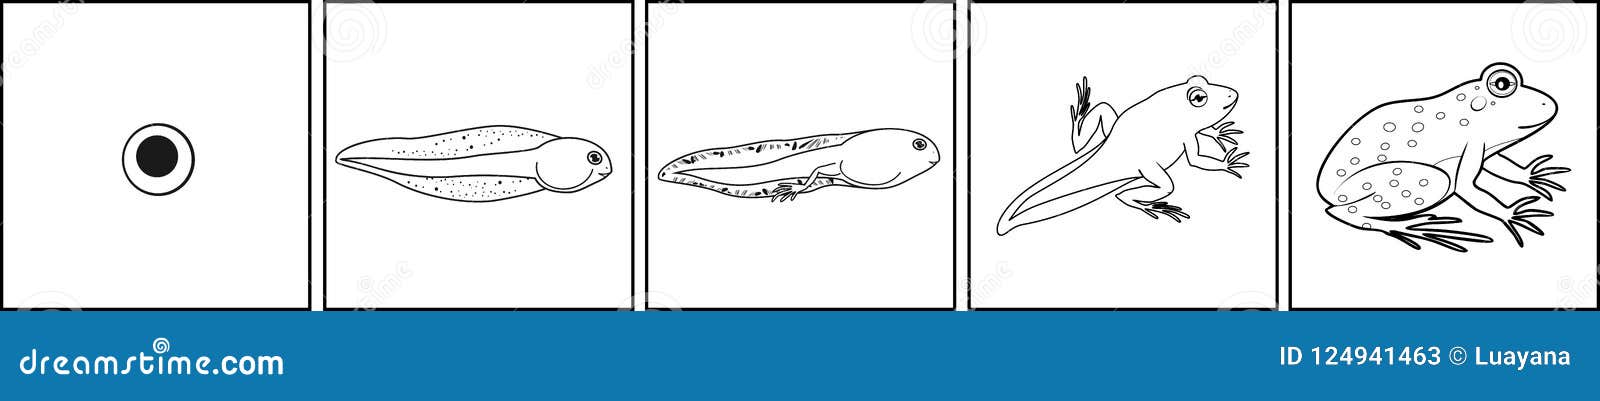 Download Coloring Page. Life Cycle Of Frog From Egg To Adult Animal ...